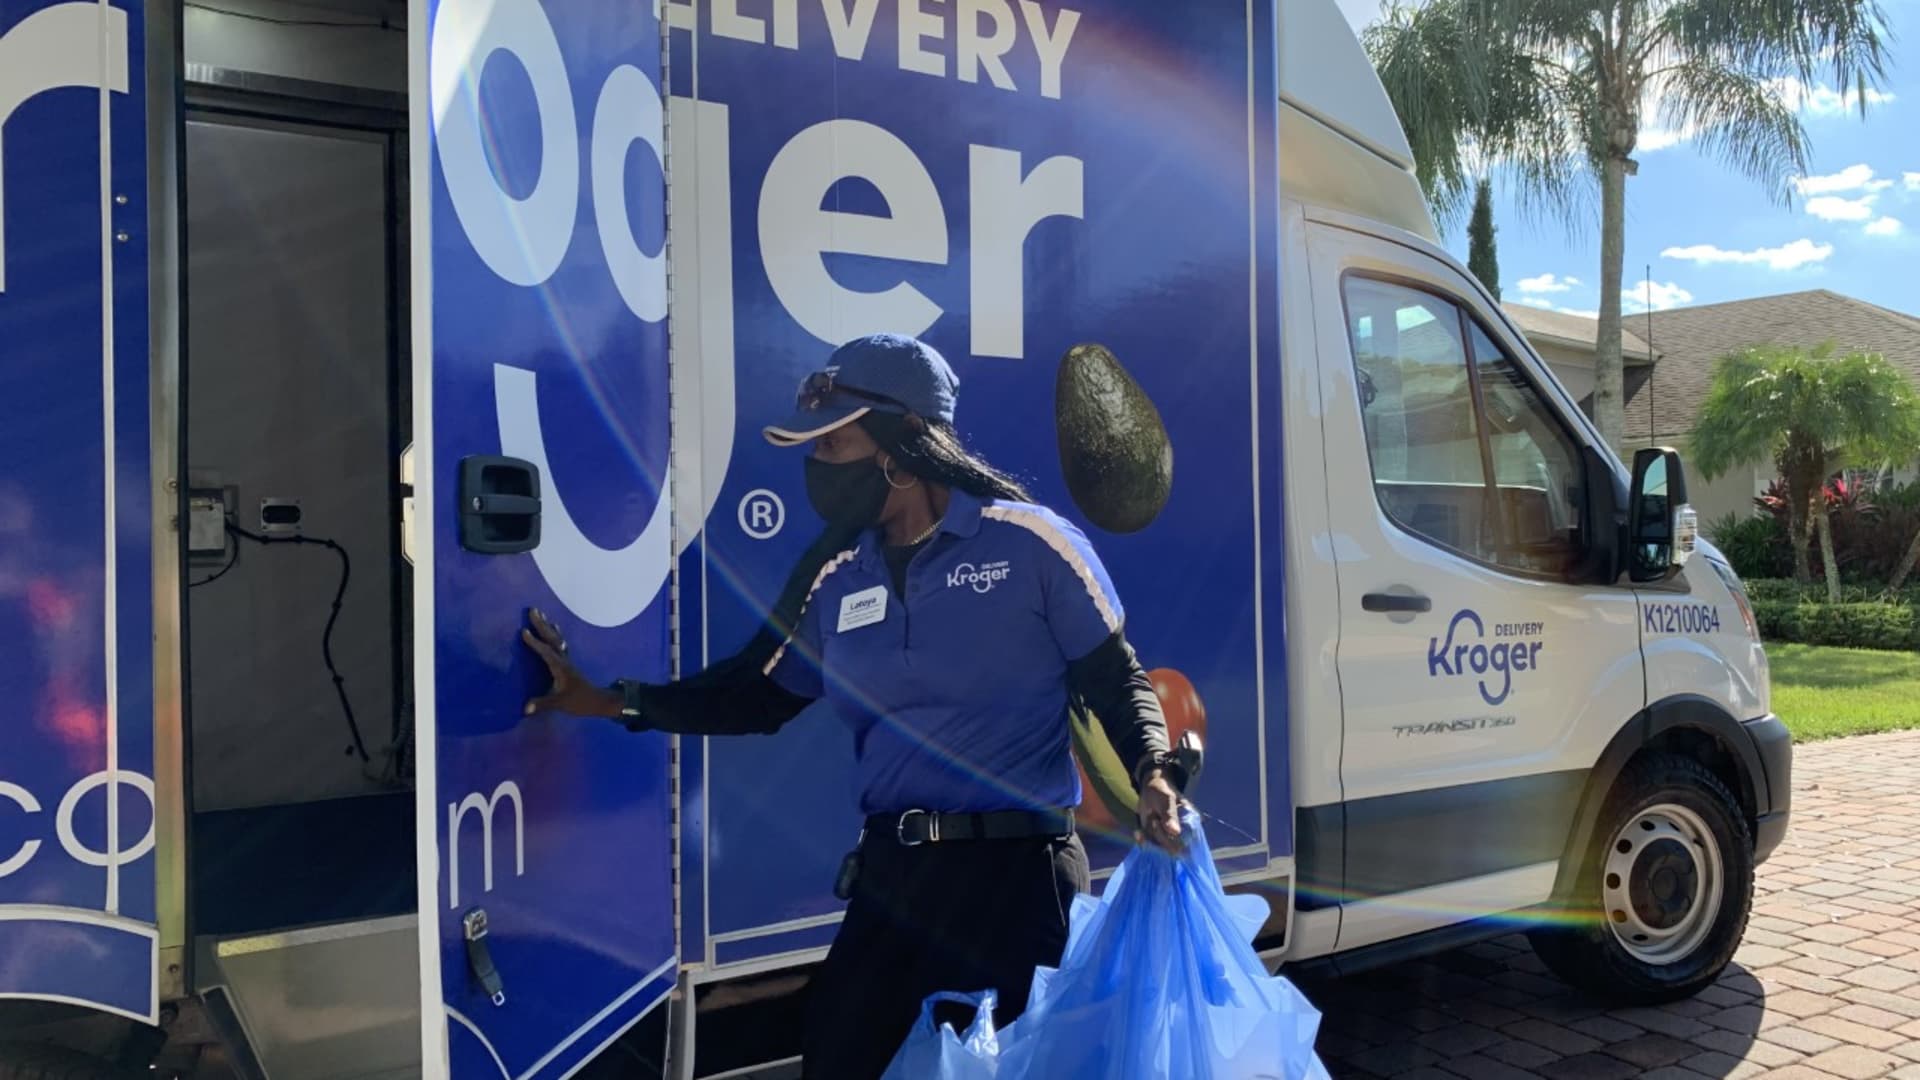 Kroger's delivery vans double as a billboard. The company is using them to get out the word that it's now offering grocery deliveries in Florida.